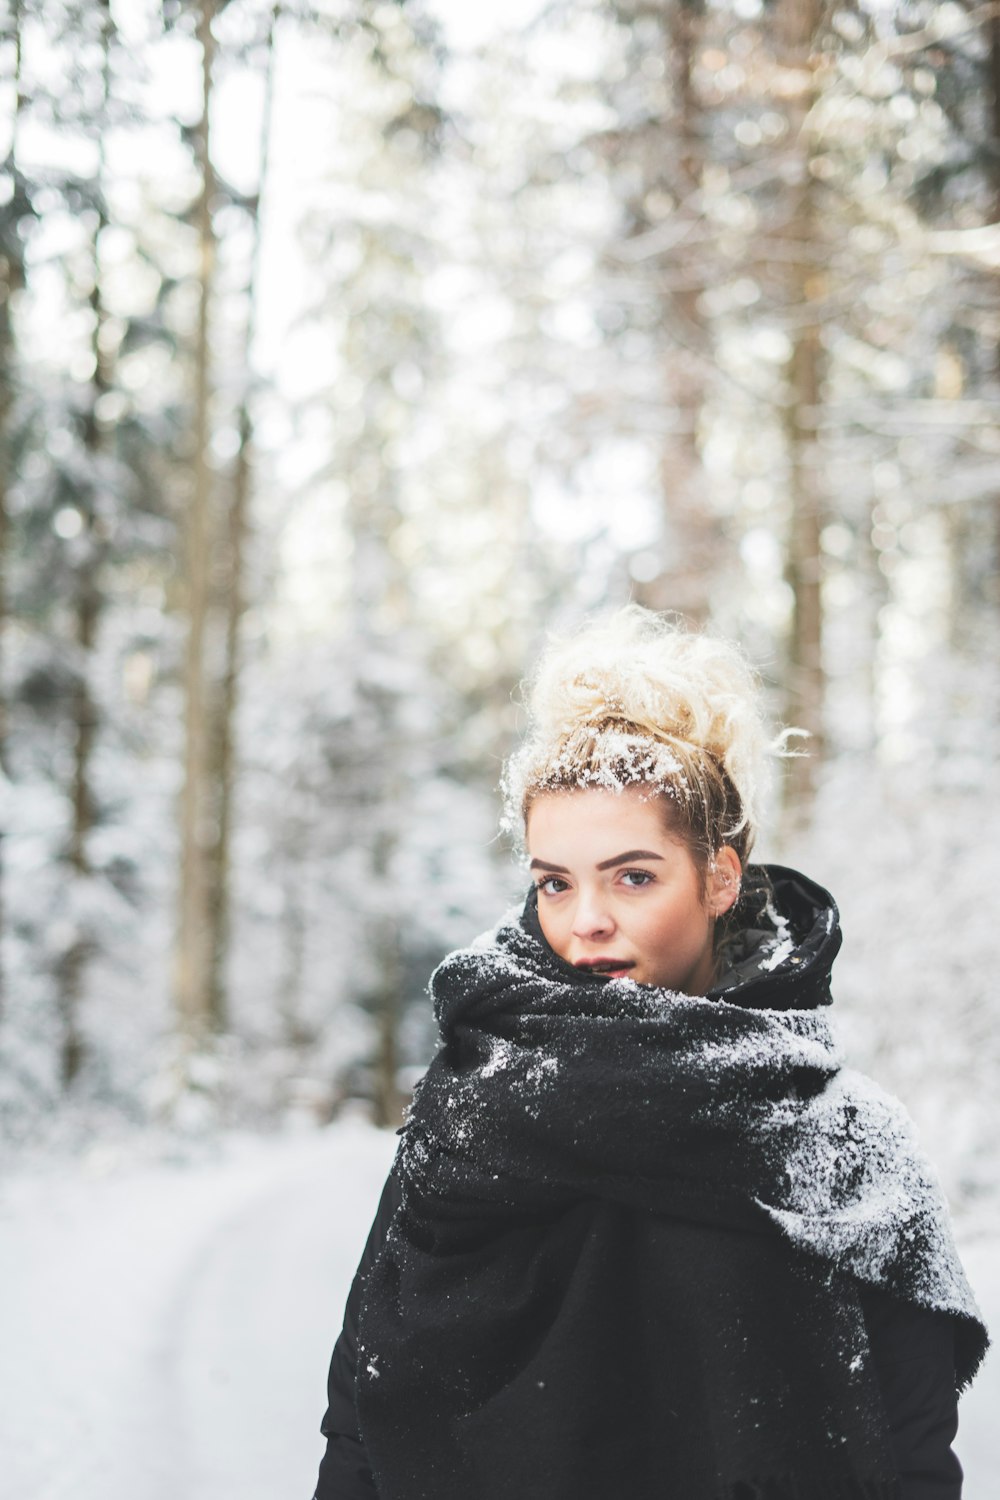 Woman Snow Pictures  Download Free Images on Unsplash